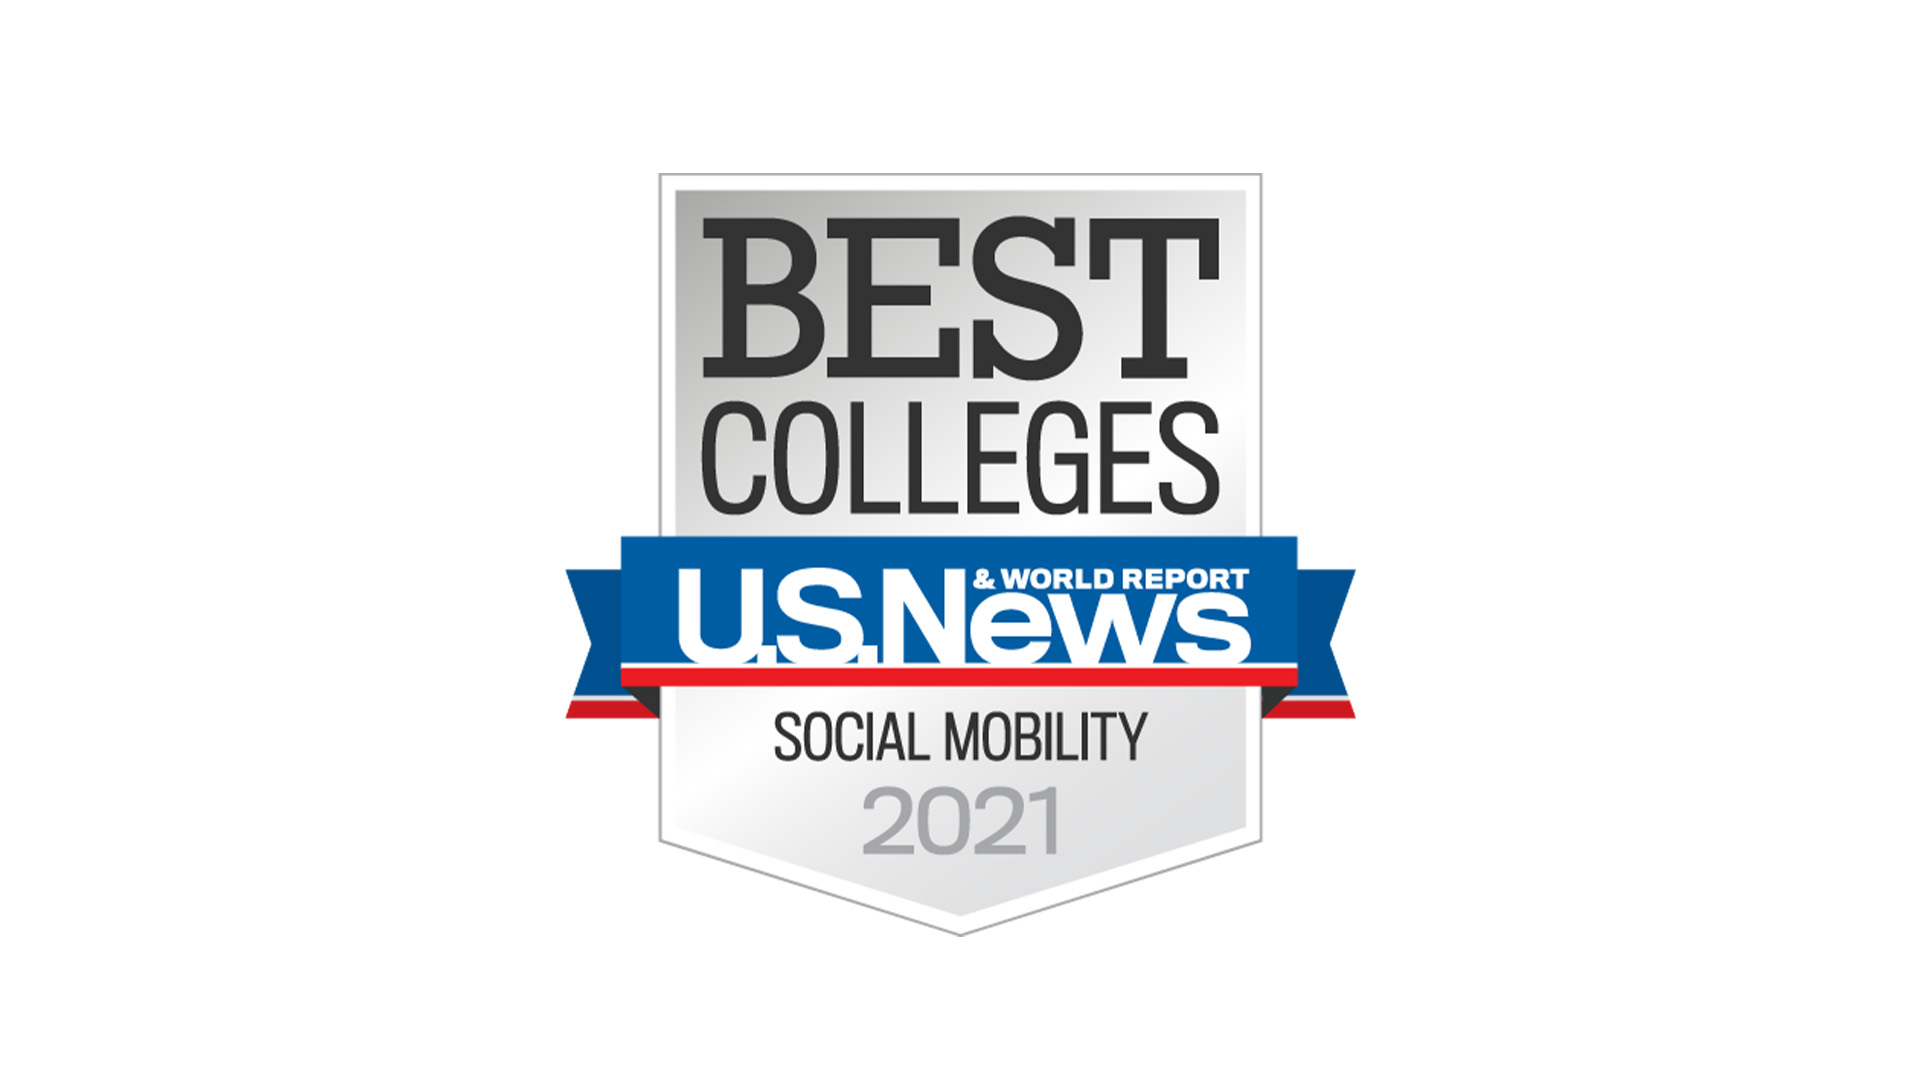 MSU Texas Recognized for Social Mobility in 2021 U.S. News Rankings